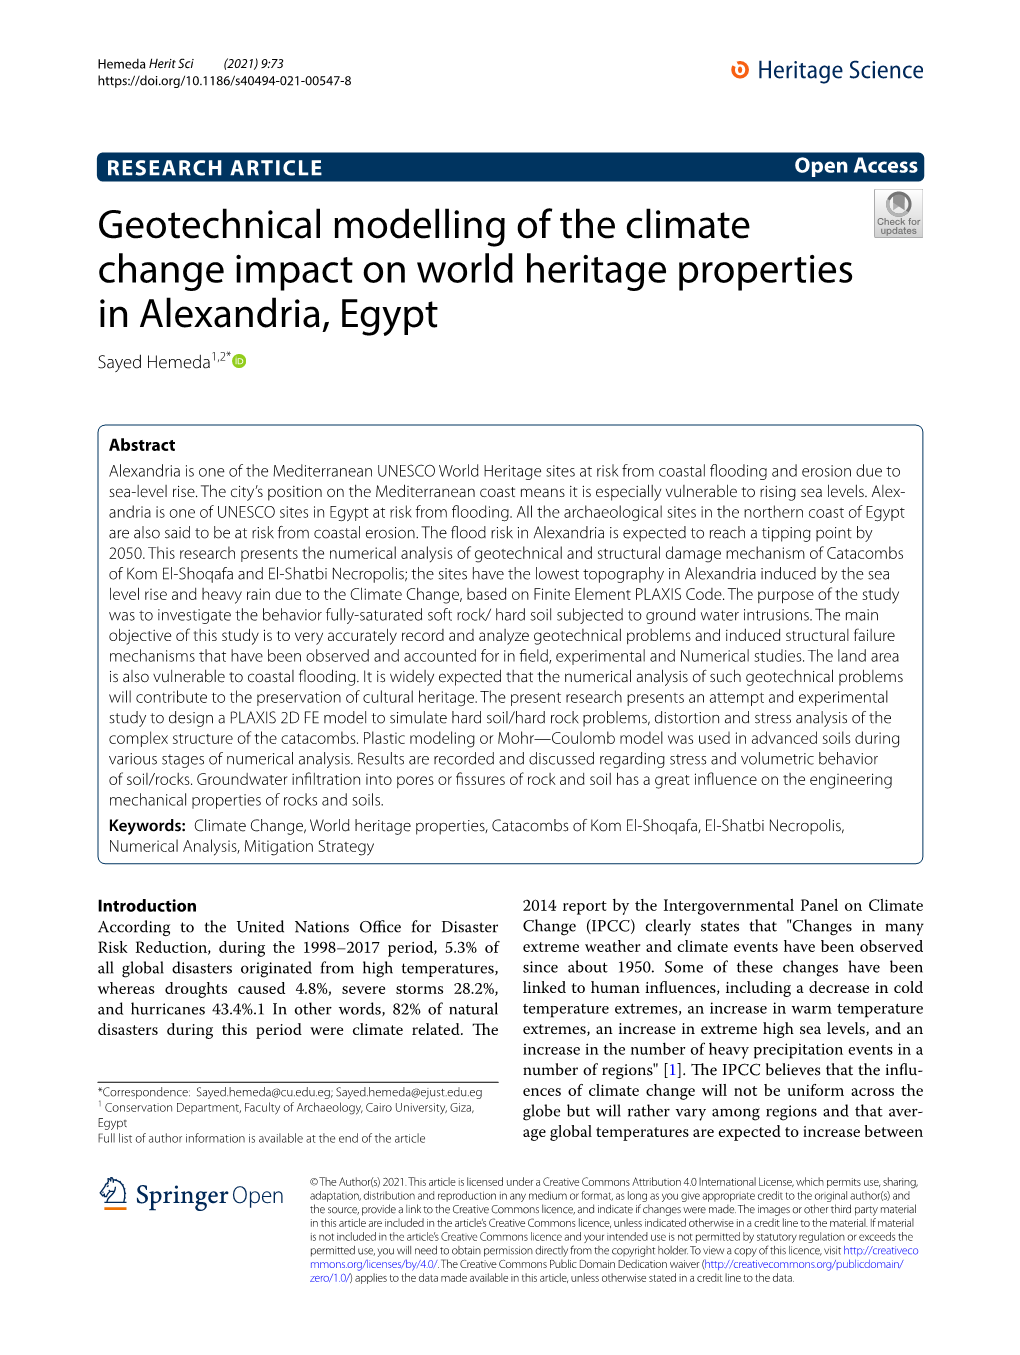 Geotechnical Modelling of the Climate Change Impact on World Heritage Properties in Alexandria, Egypt Sayed Hemeda1,2*